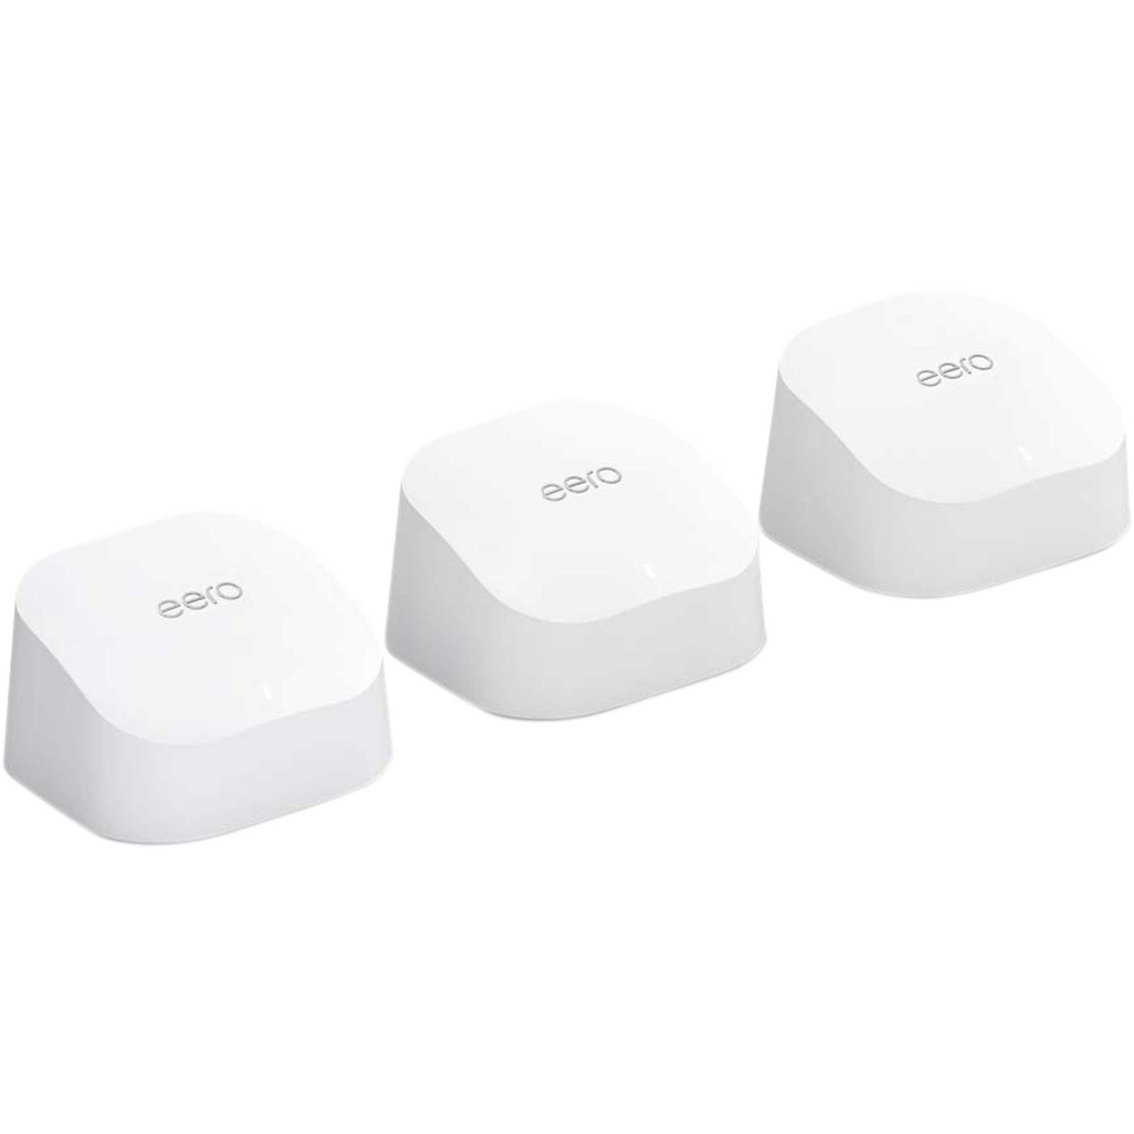 Amazon Eero 6 Mesh Wi Fi 6 System With 1 Router And  2 Extenders | Networking | Electronics | Shop The Exchange $112